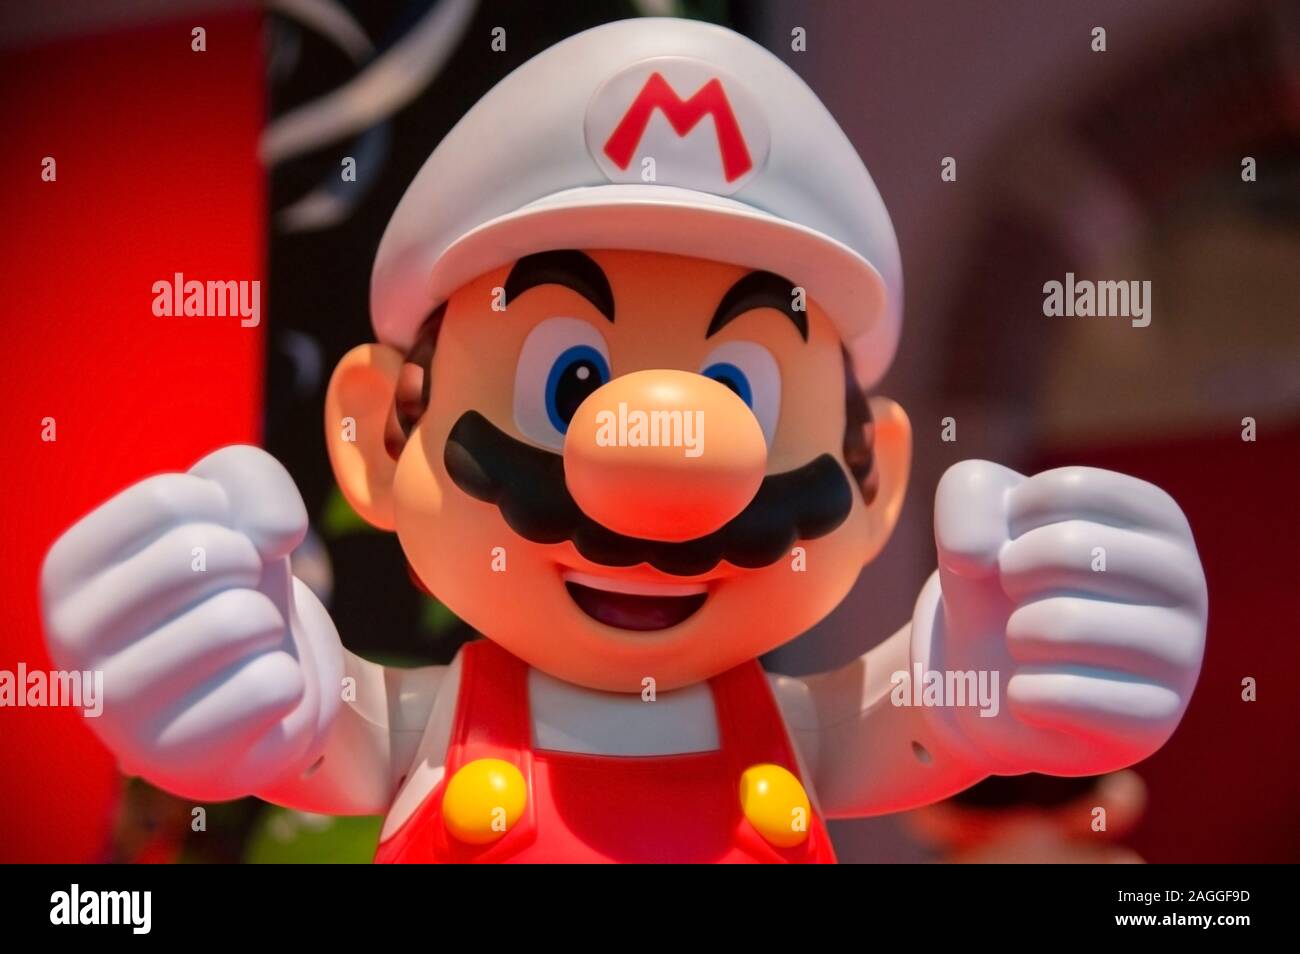 Mario Bross Figure At The Cool Japan Exhibition At The Tropenmuseum Amsterdam The Netherlands 2019 Stock Photo